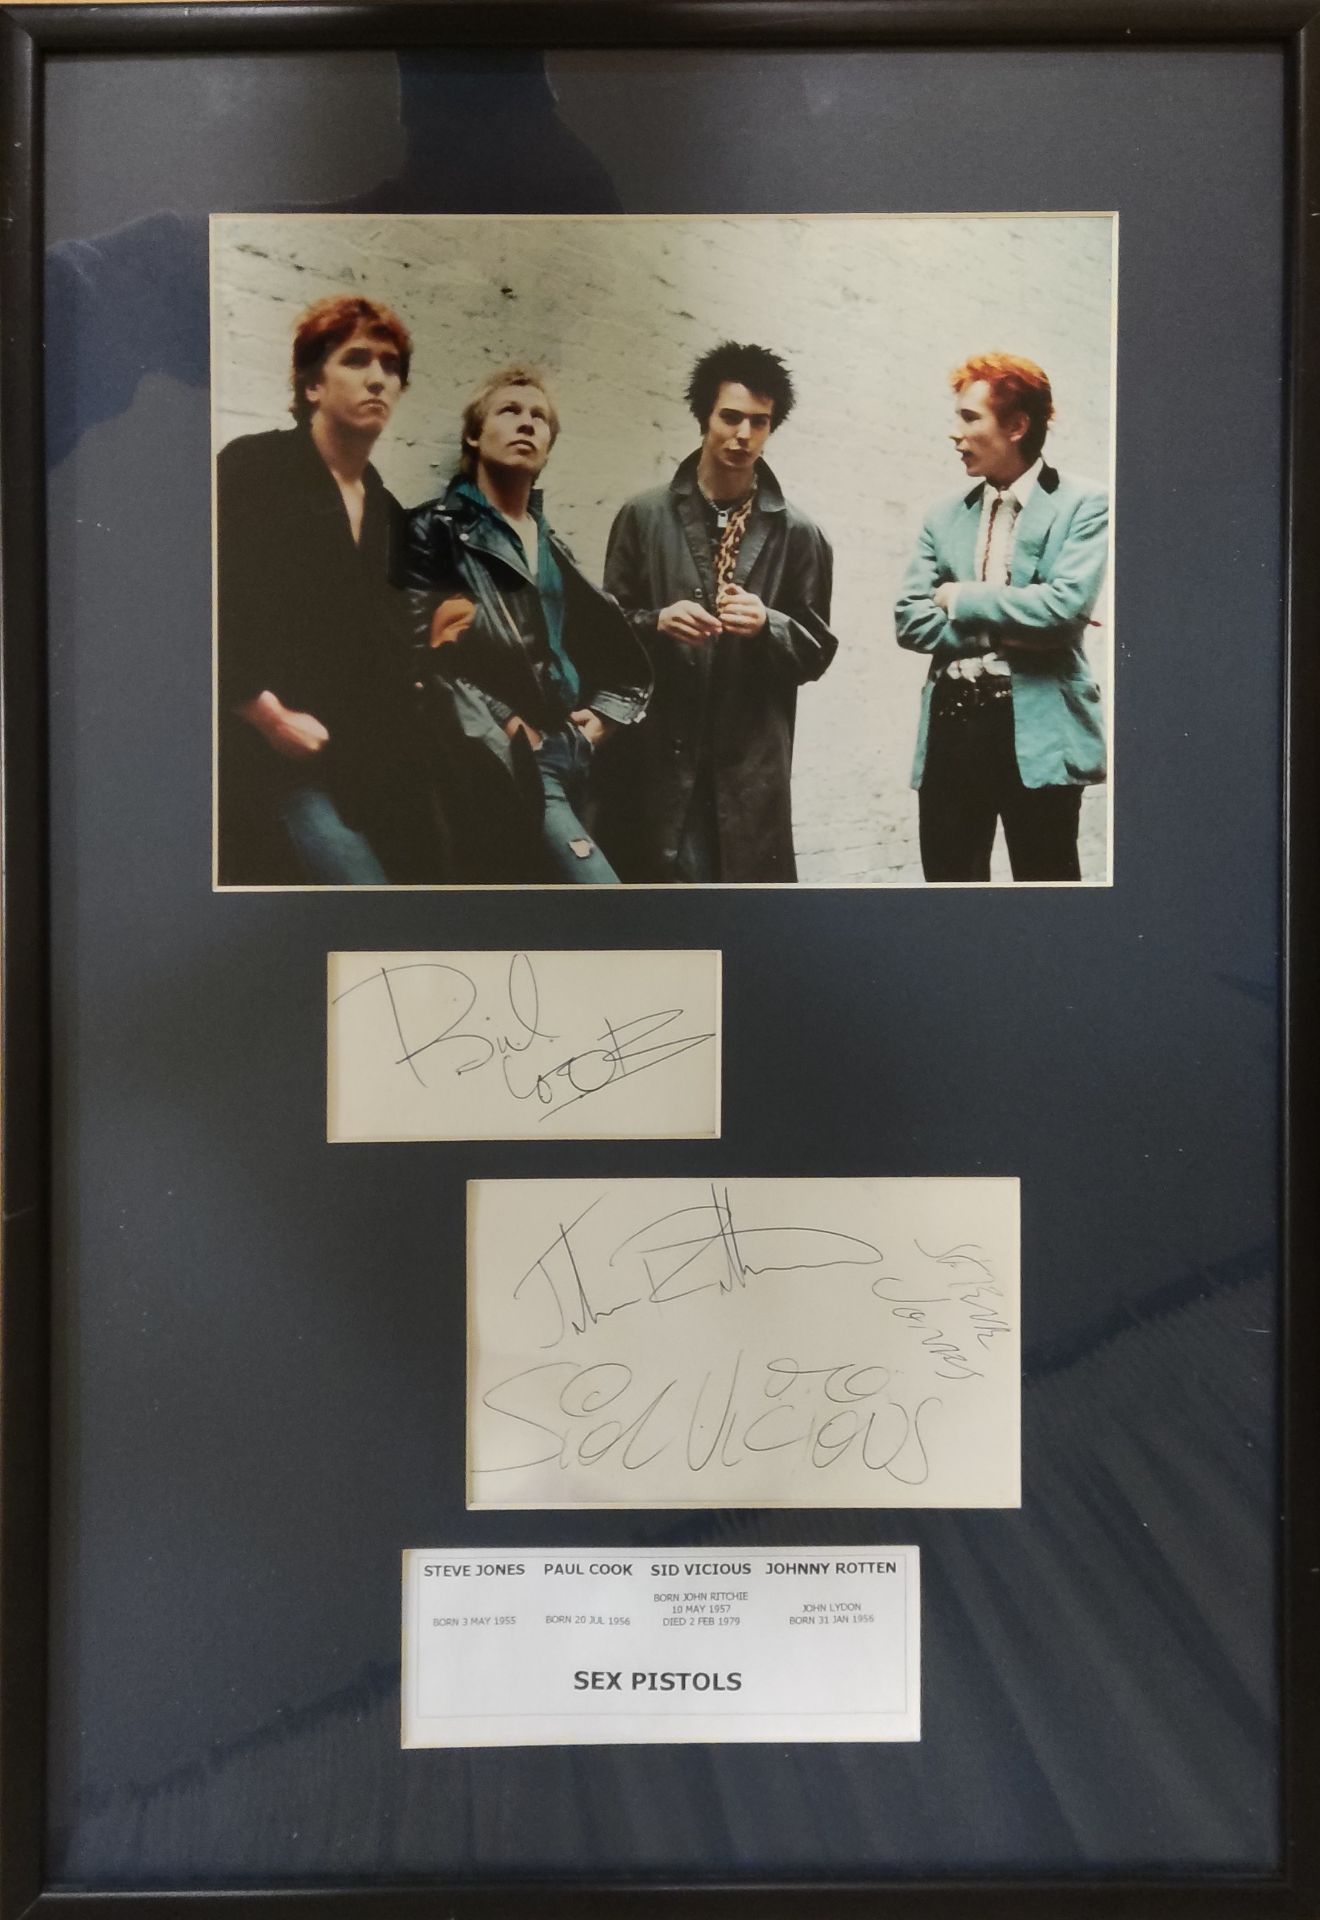 SEX PISTOLS: A rare set of signatures by four members of the 1970s English punk rock band the Sex